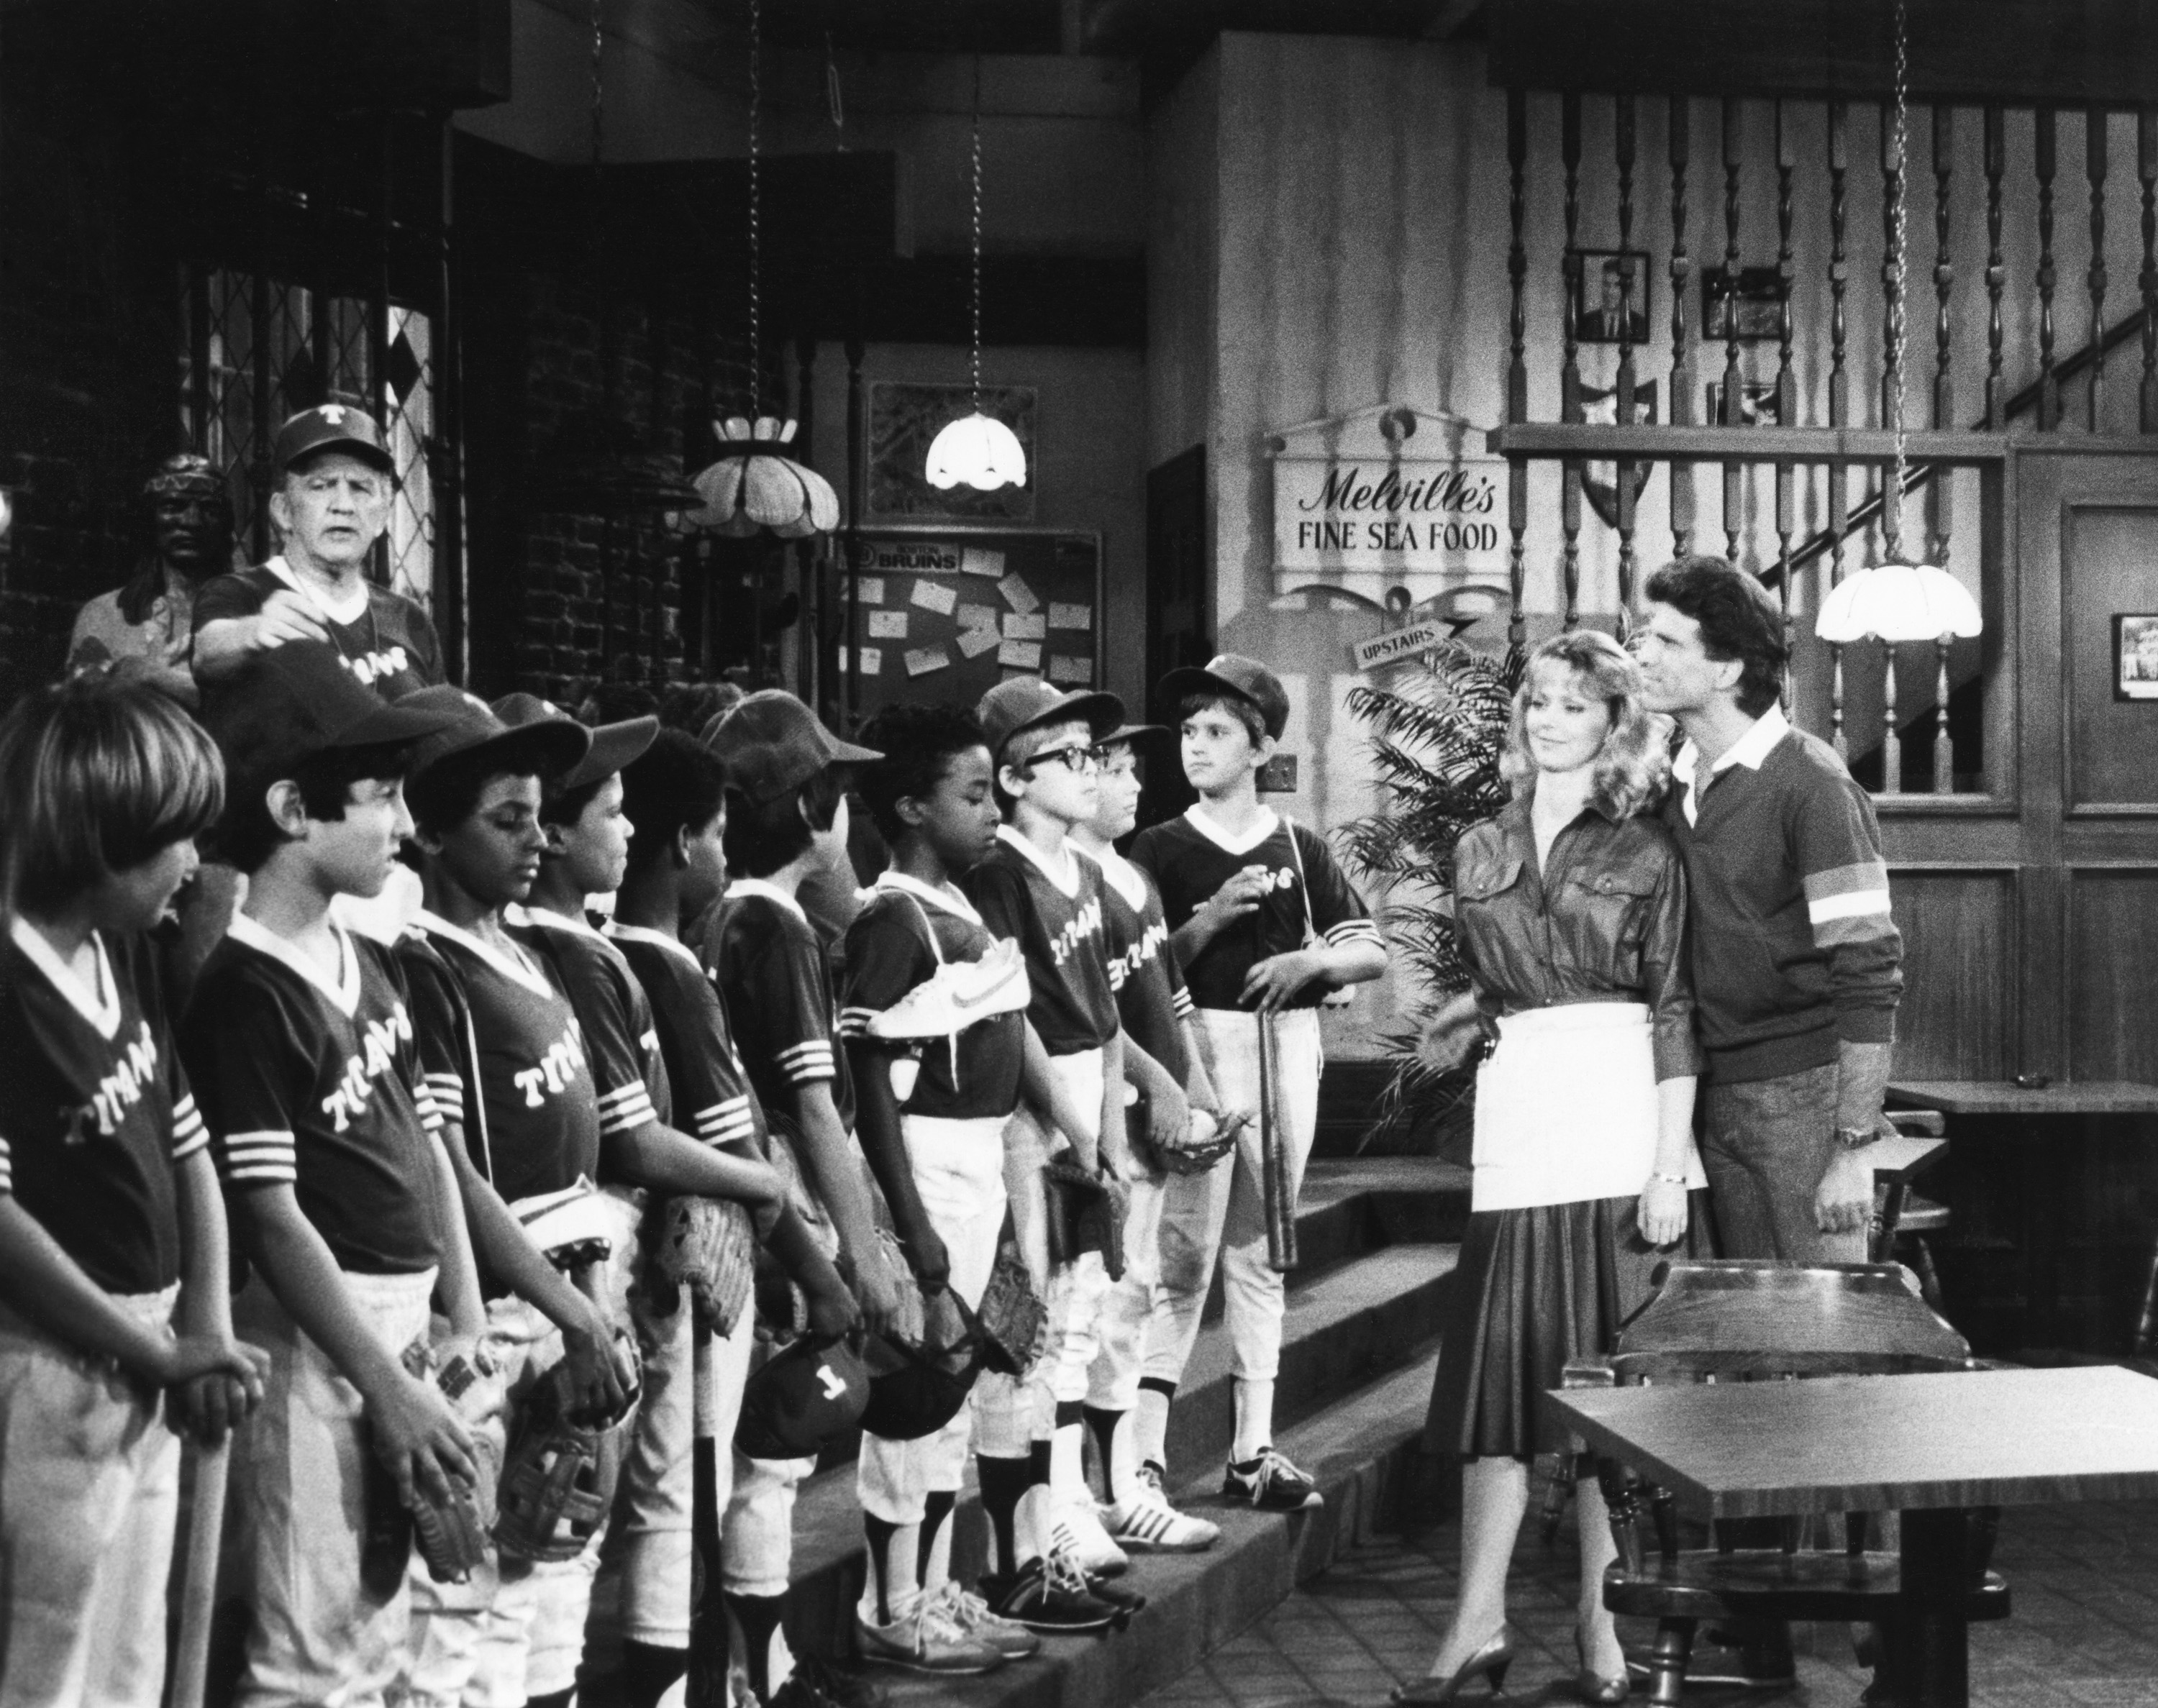 Still of Ted Danson, Shelley Long and Nicholas Colasanto in Cheers (1982)